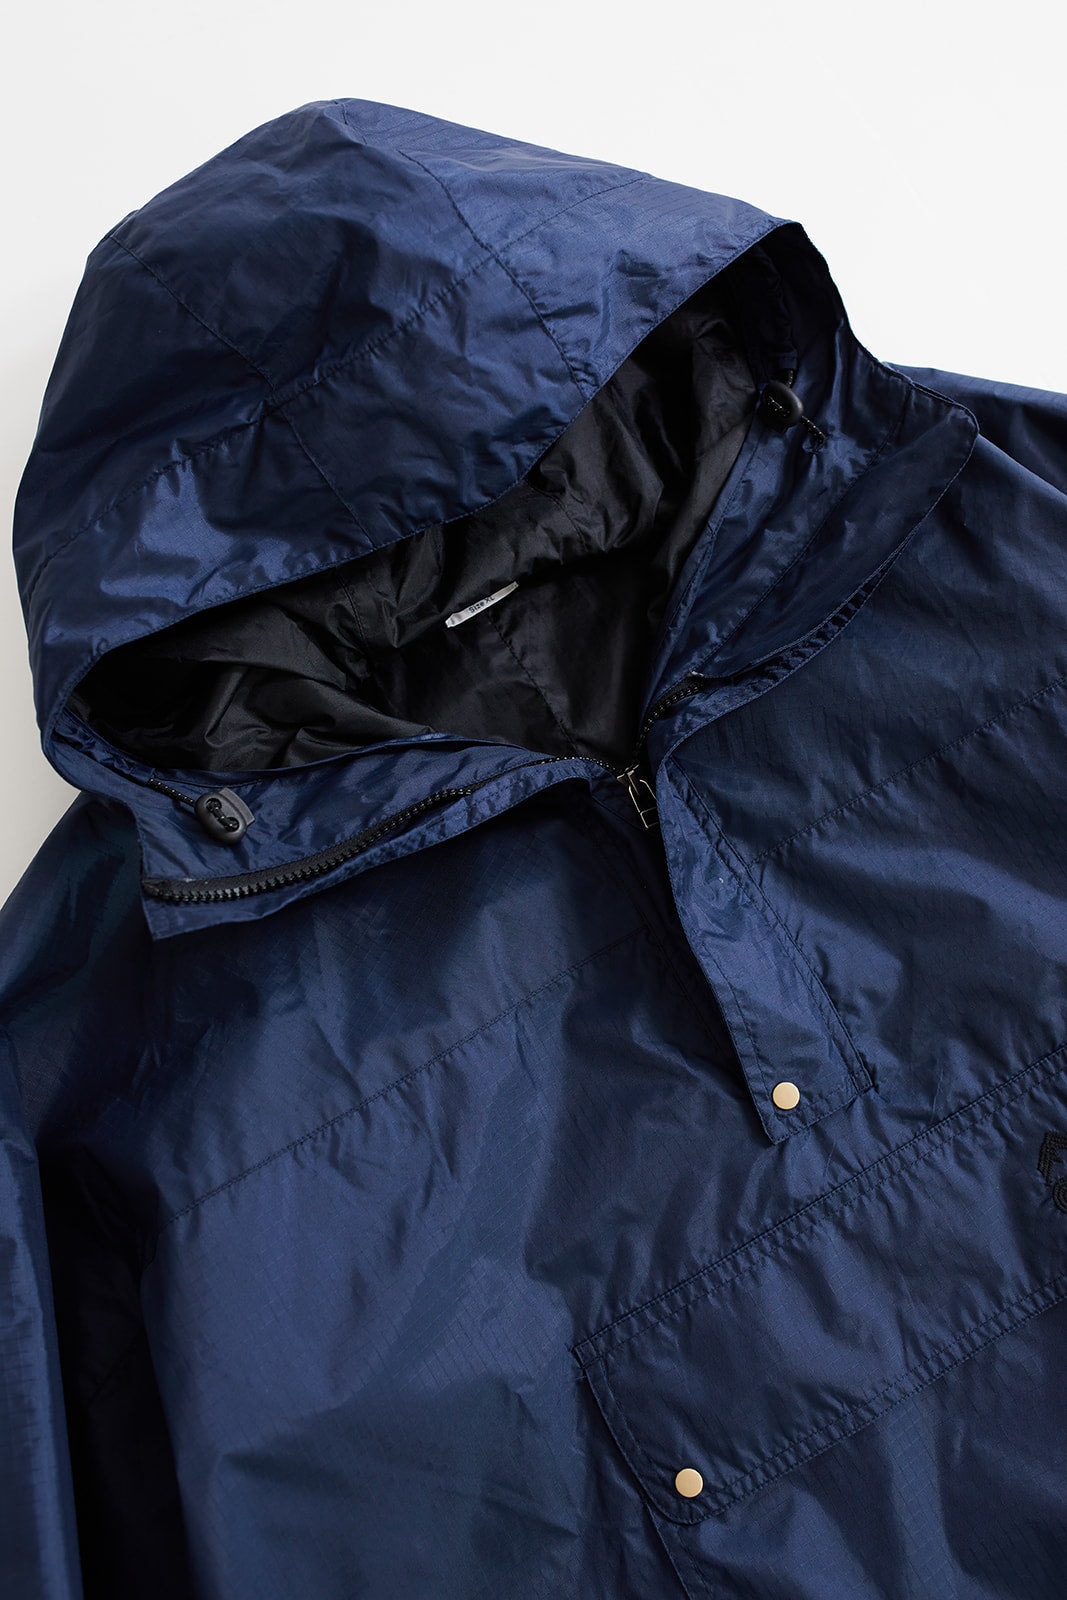 SWITCHBACK PACKABLE CAGOULE - NAVY NYLON RIPSTOP